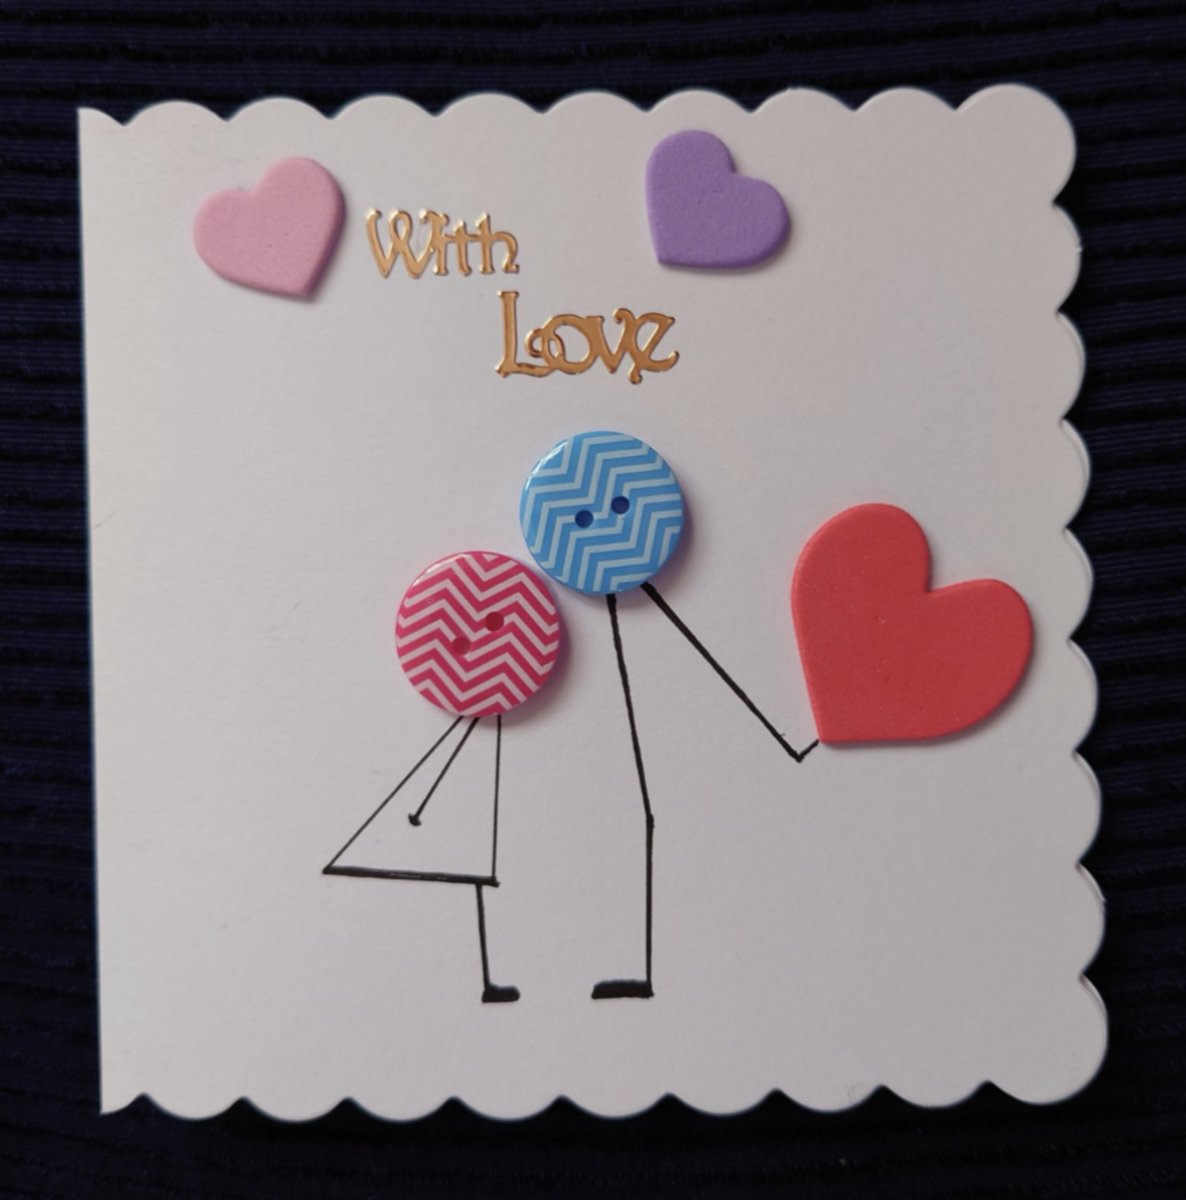 Write out some love and send it enclosed in a handcrafted card ❤️ MoniCaptures: etsy.com/uk/shop/MoniCa… #cards #etsycards #handcrafted #giftideas